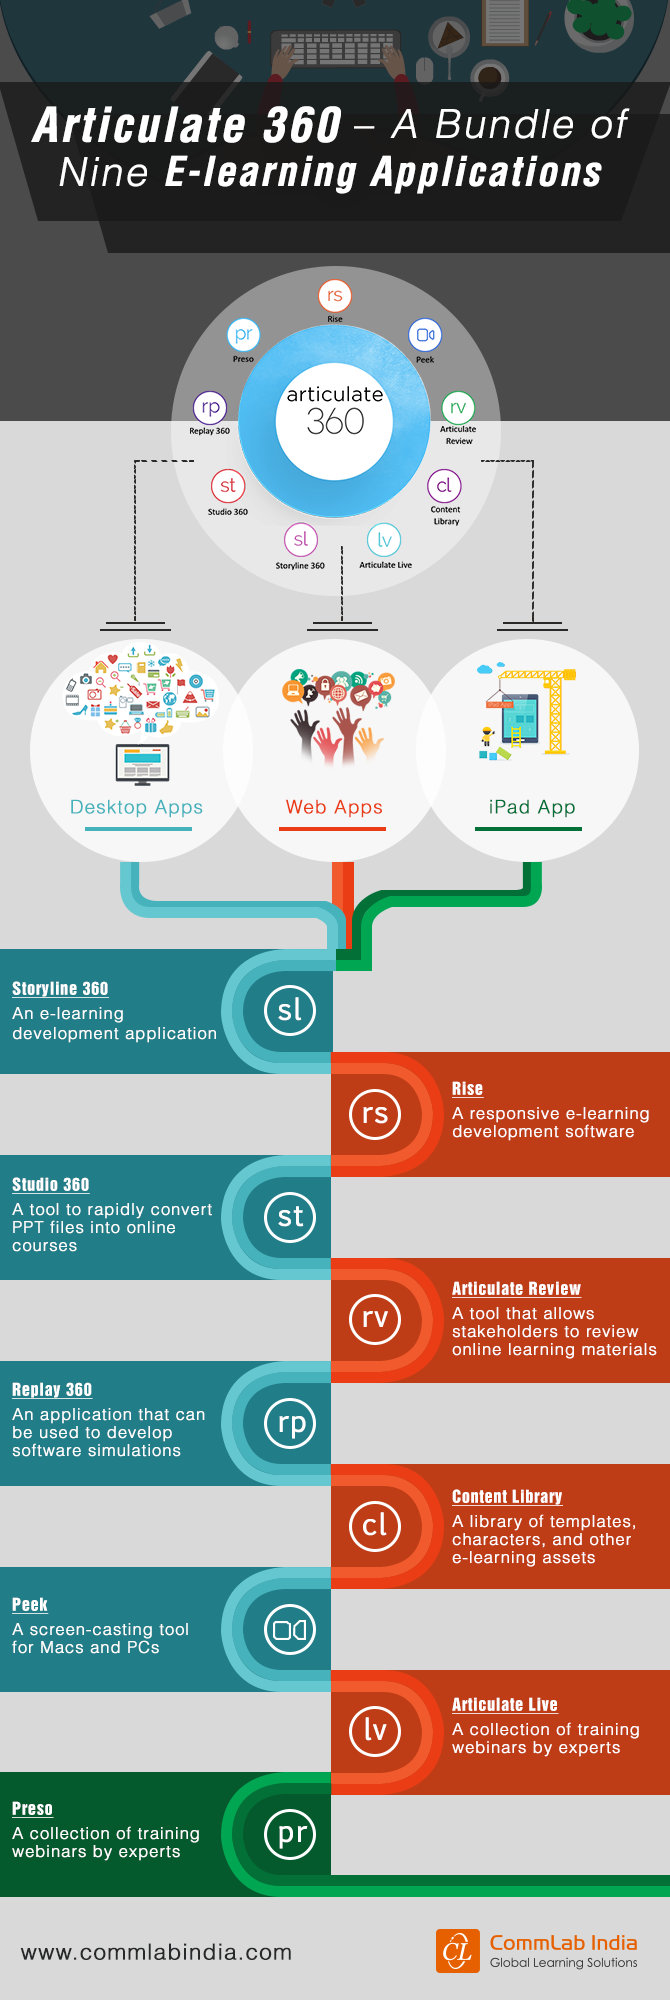 Articulate 360 - A Bundle of Nine E-learning Applications [Infographic]